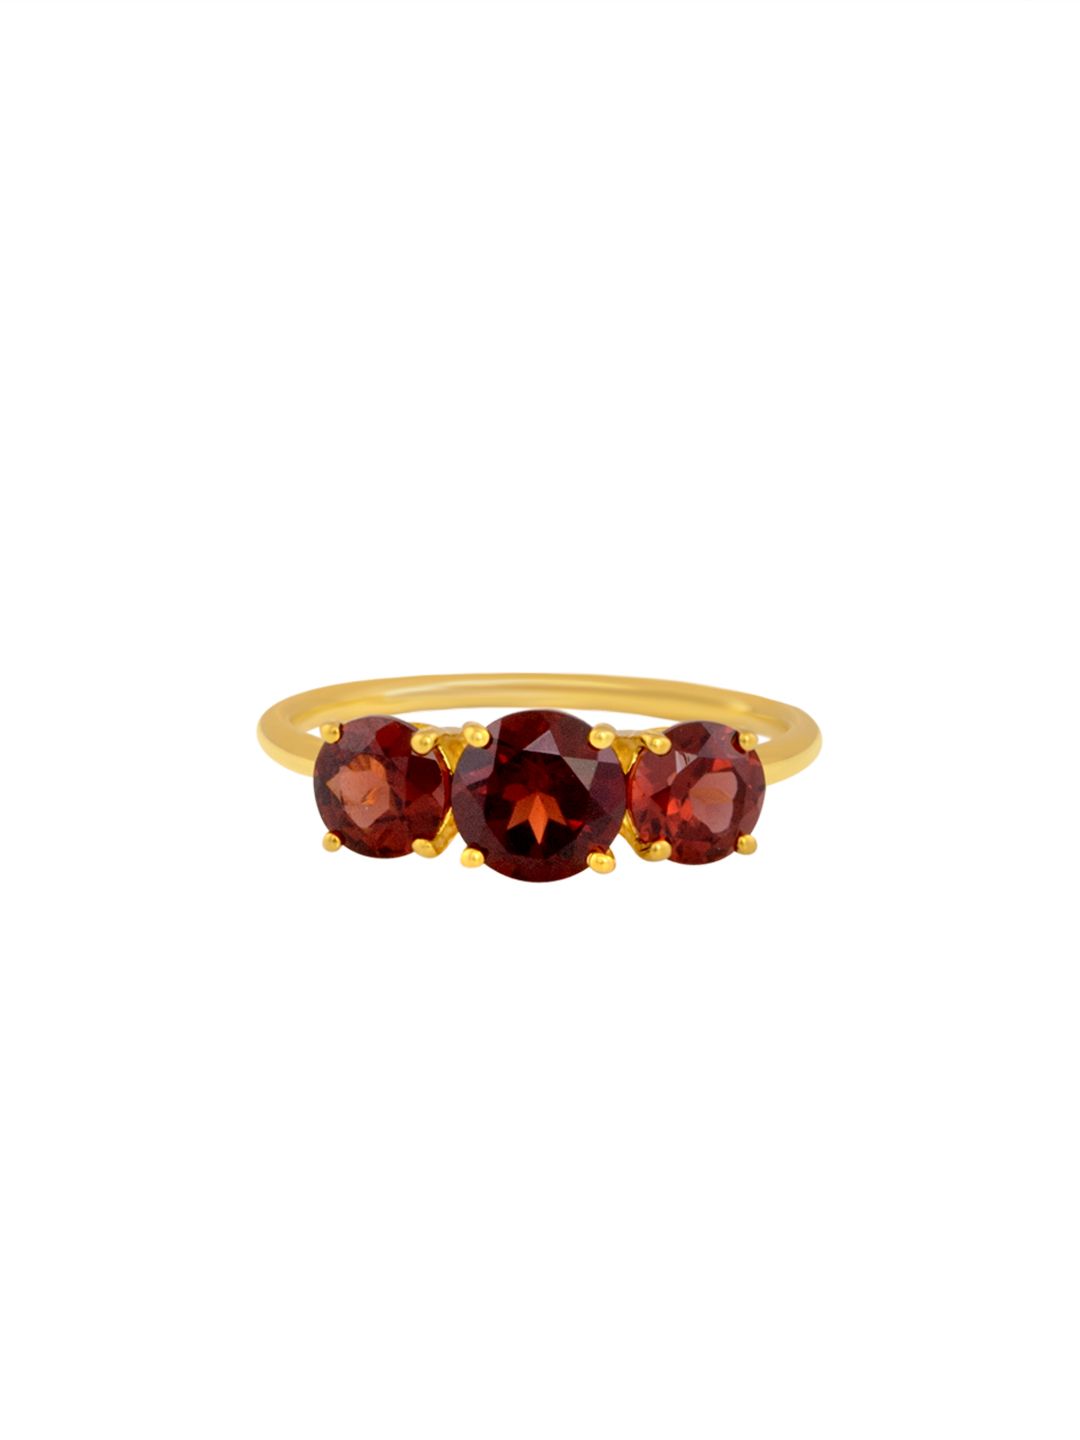 TALISMAN Gold-Plated With Maroon Garnet Trio Gemstone Handcrafted Ring Price in India